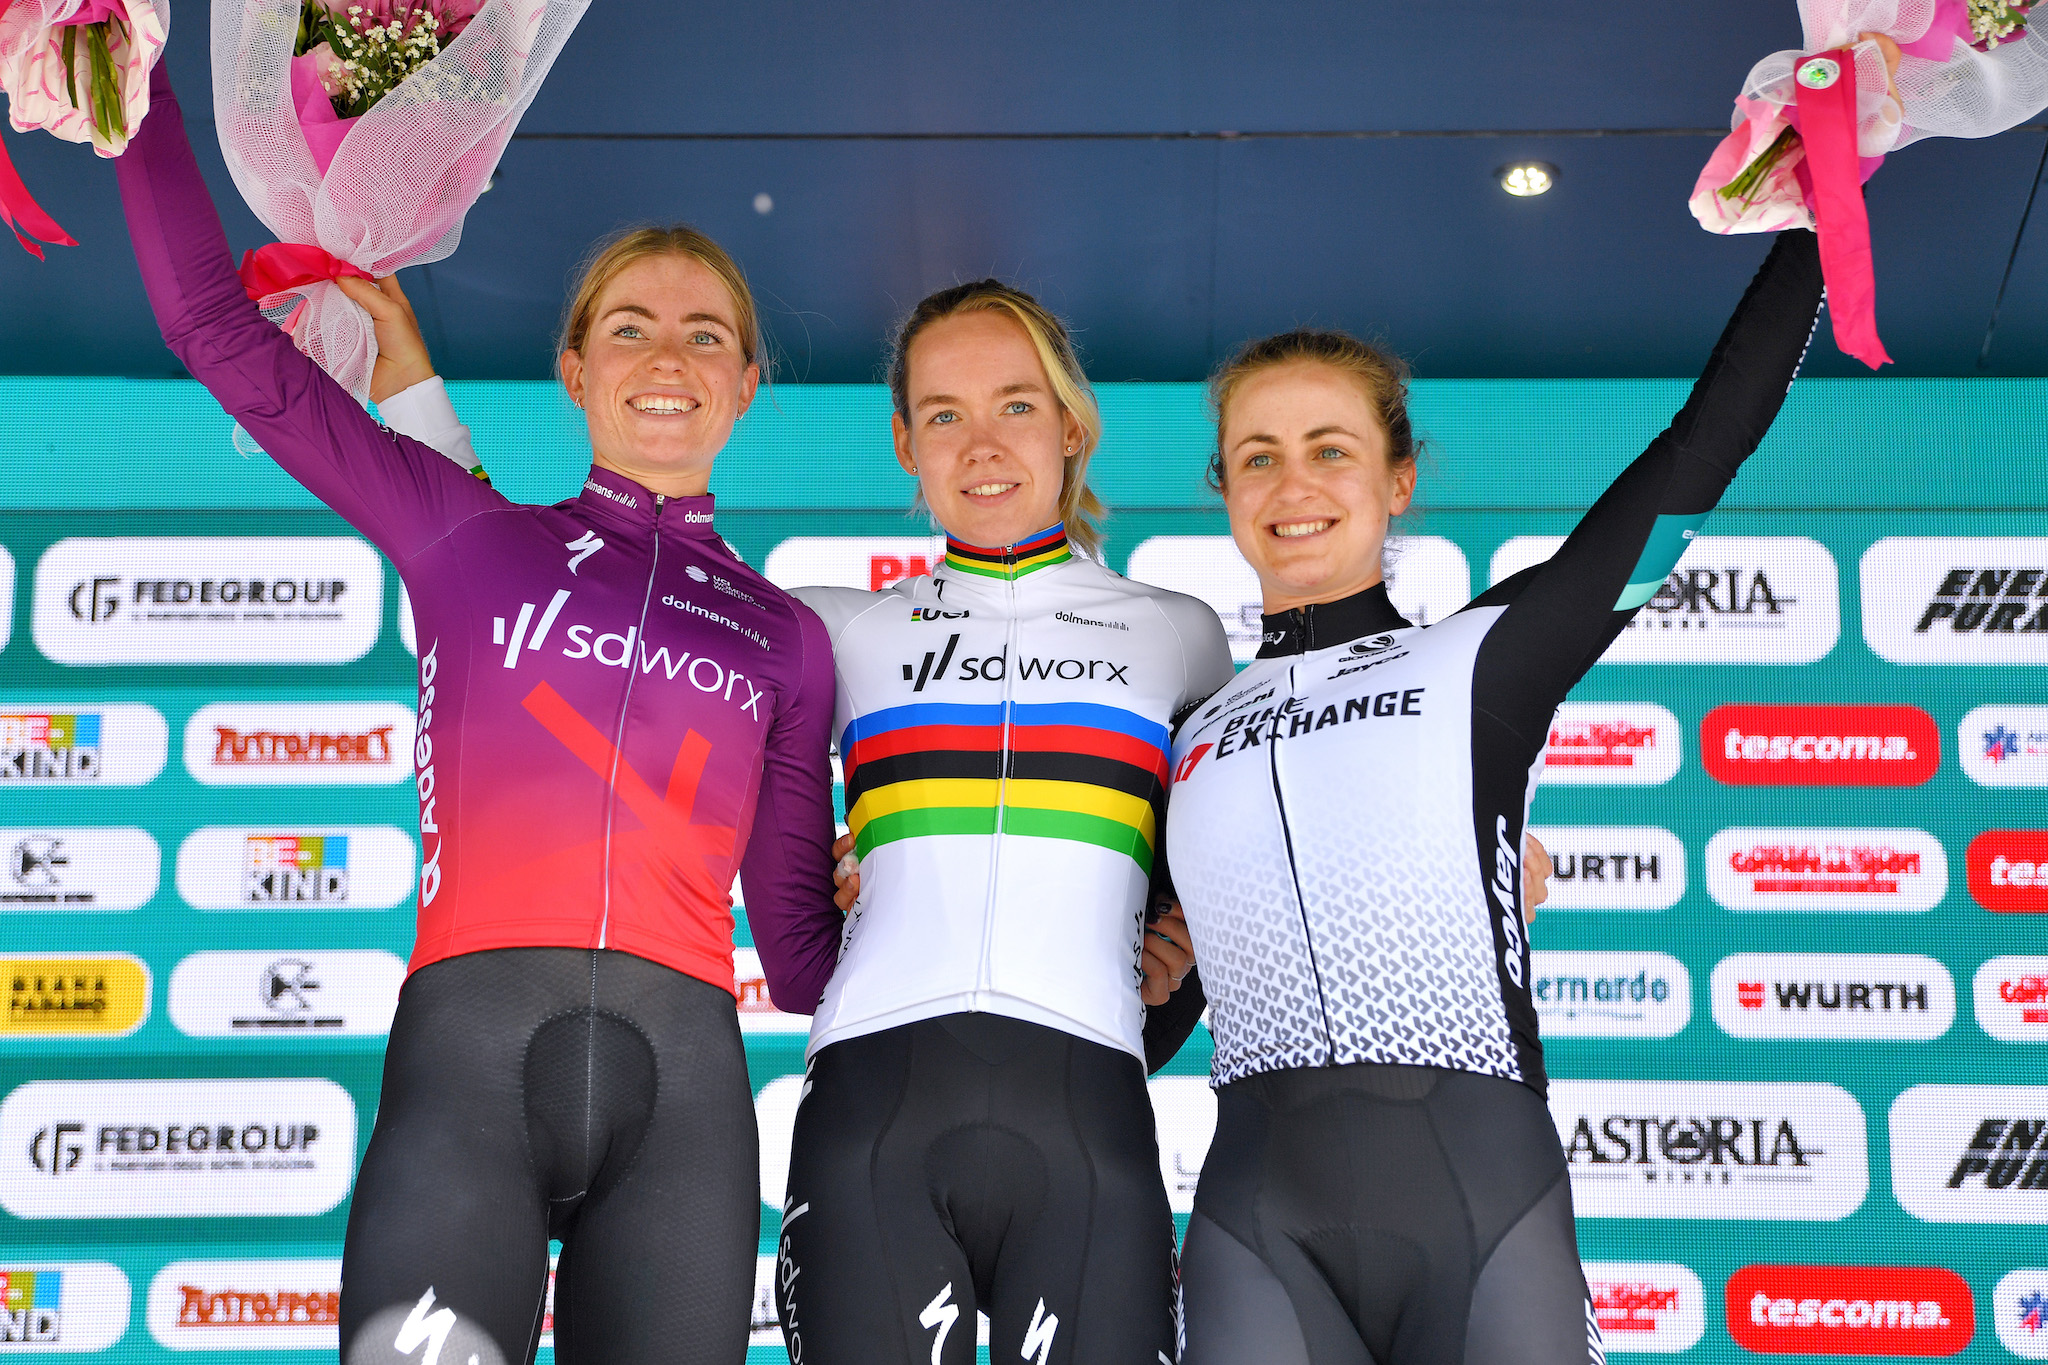 radioactiviteit Oorlogsschip conjunctie Brown powers to her first Giro Donne podium with third place on stage four  mountain time trial – Team BikeExchange Jayco